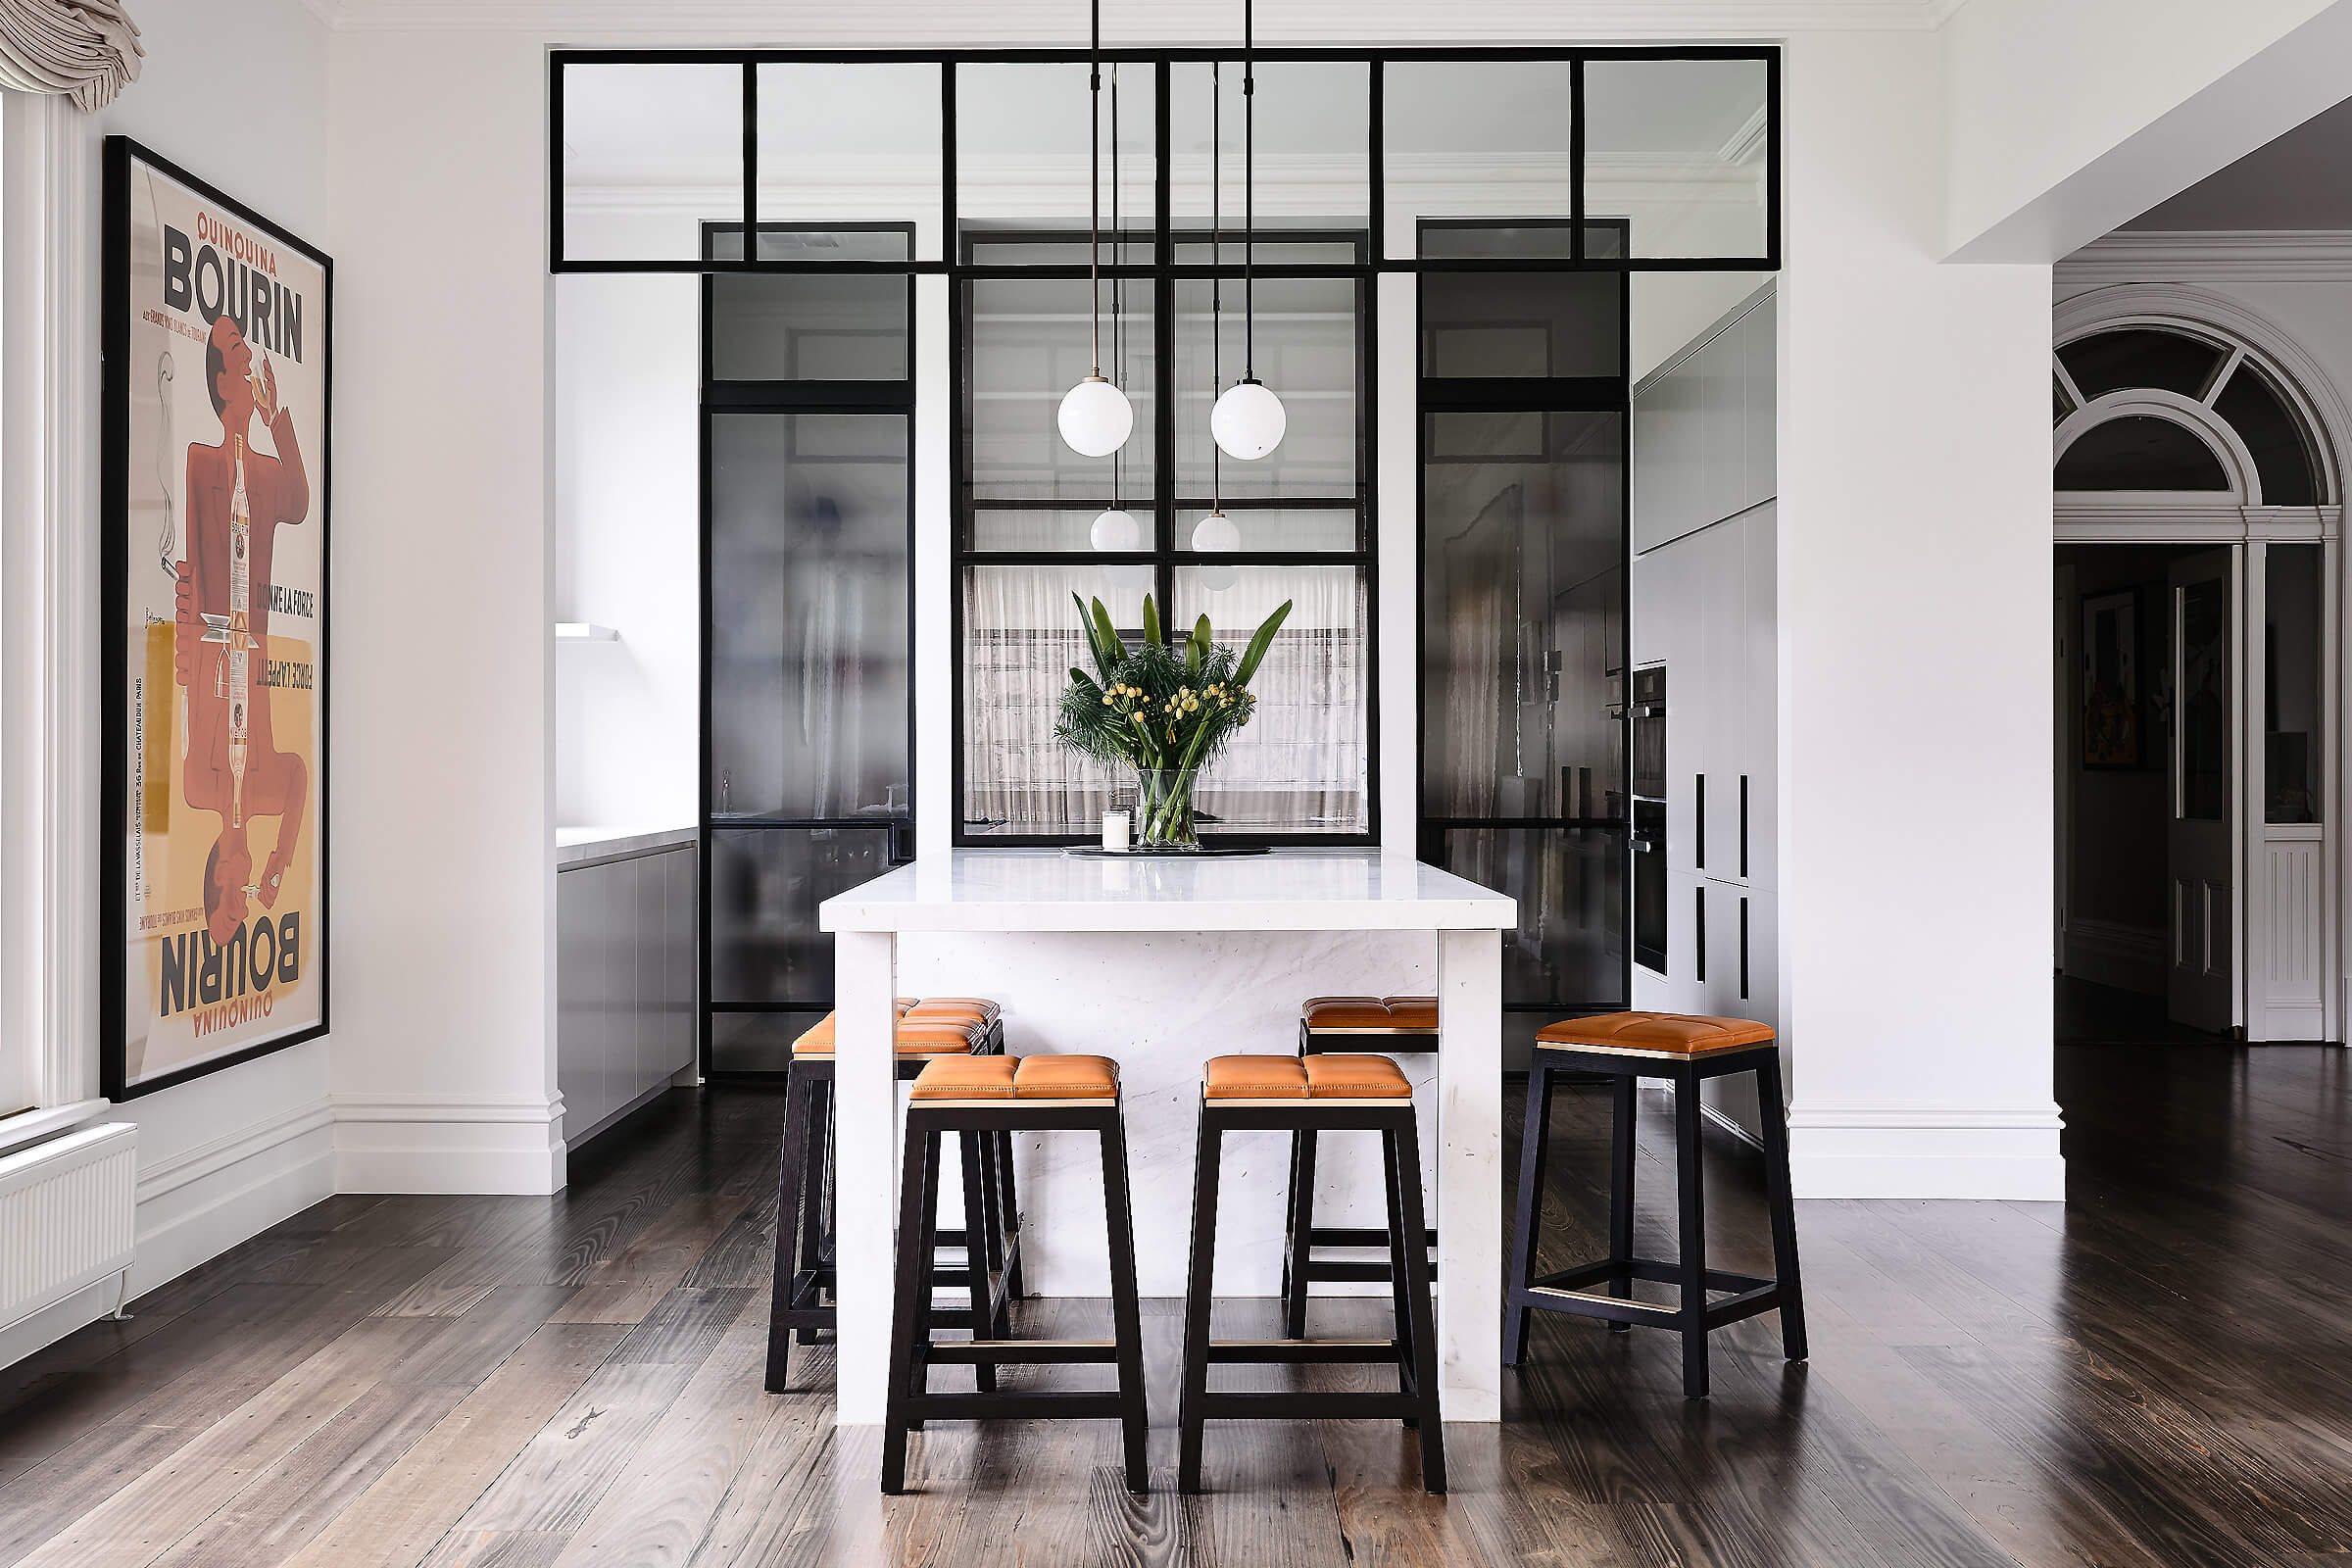 This stunning architectural home is a dream to walk through and enjoy the natural sunlight shinning through as you sit on one of the designer stools by local Australian designer francocrea